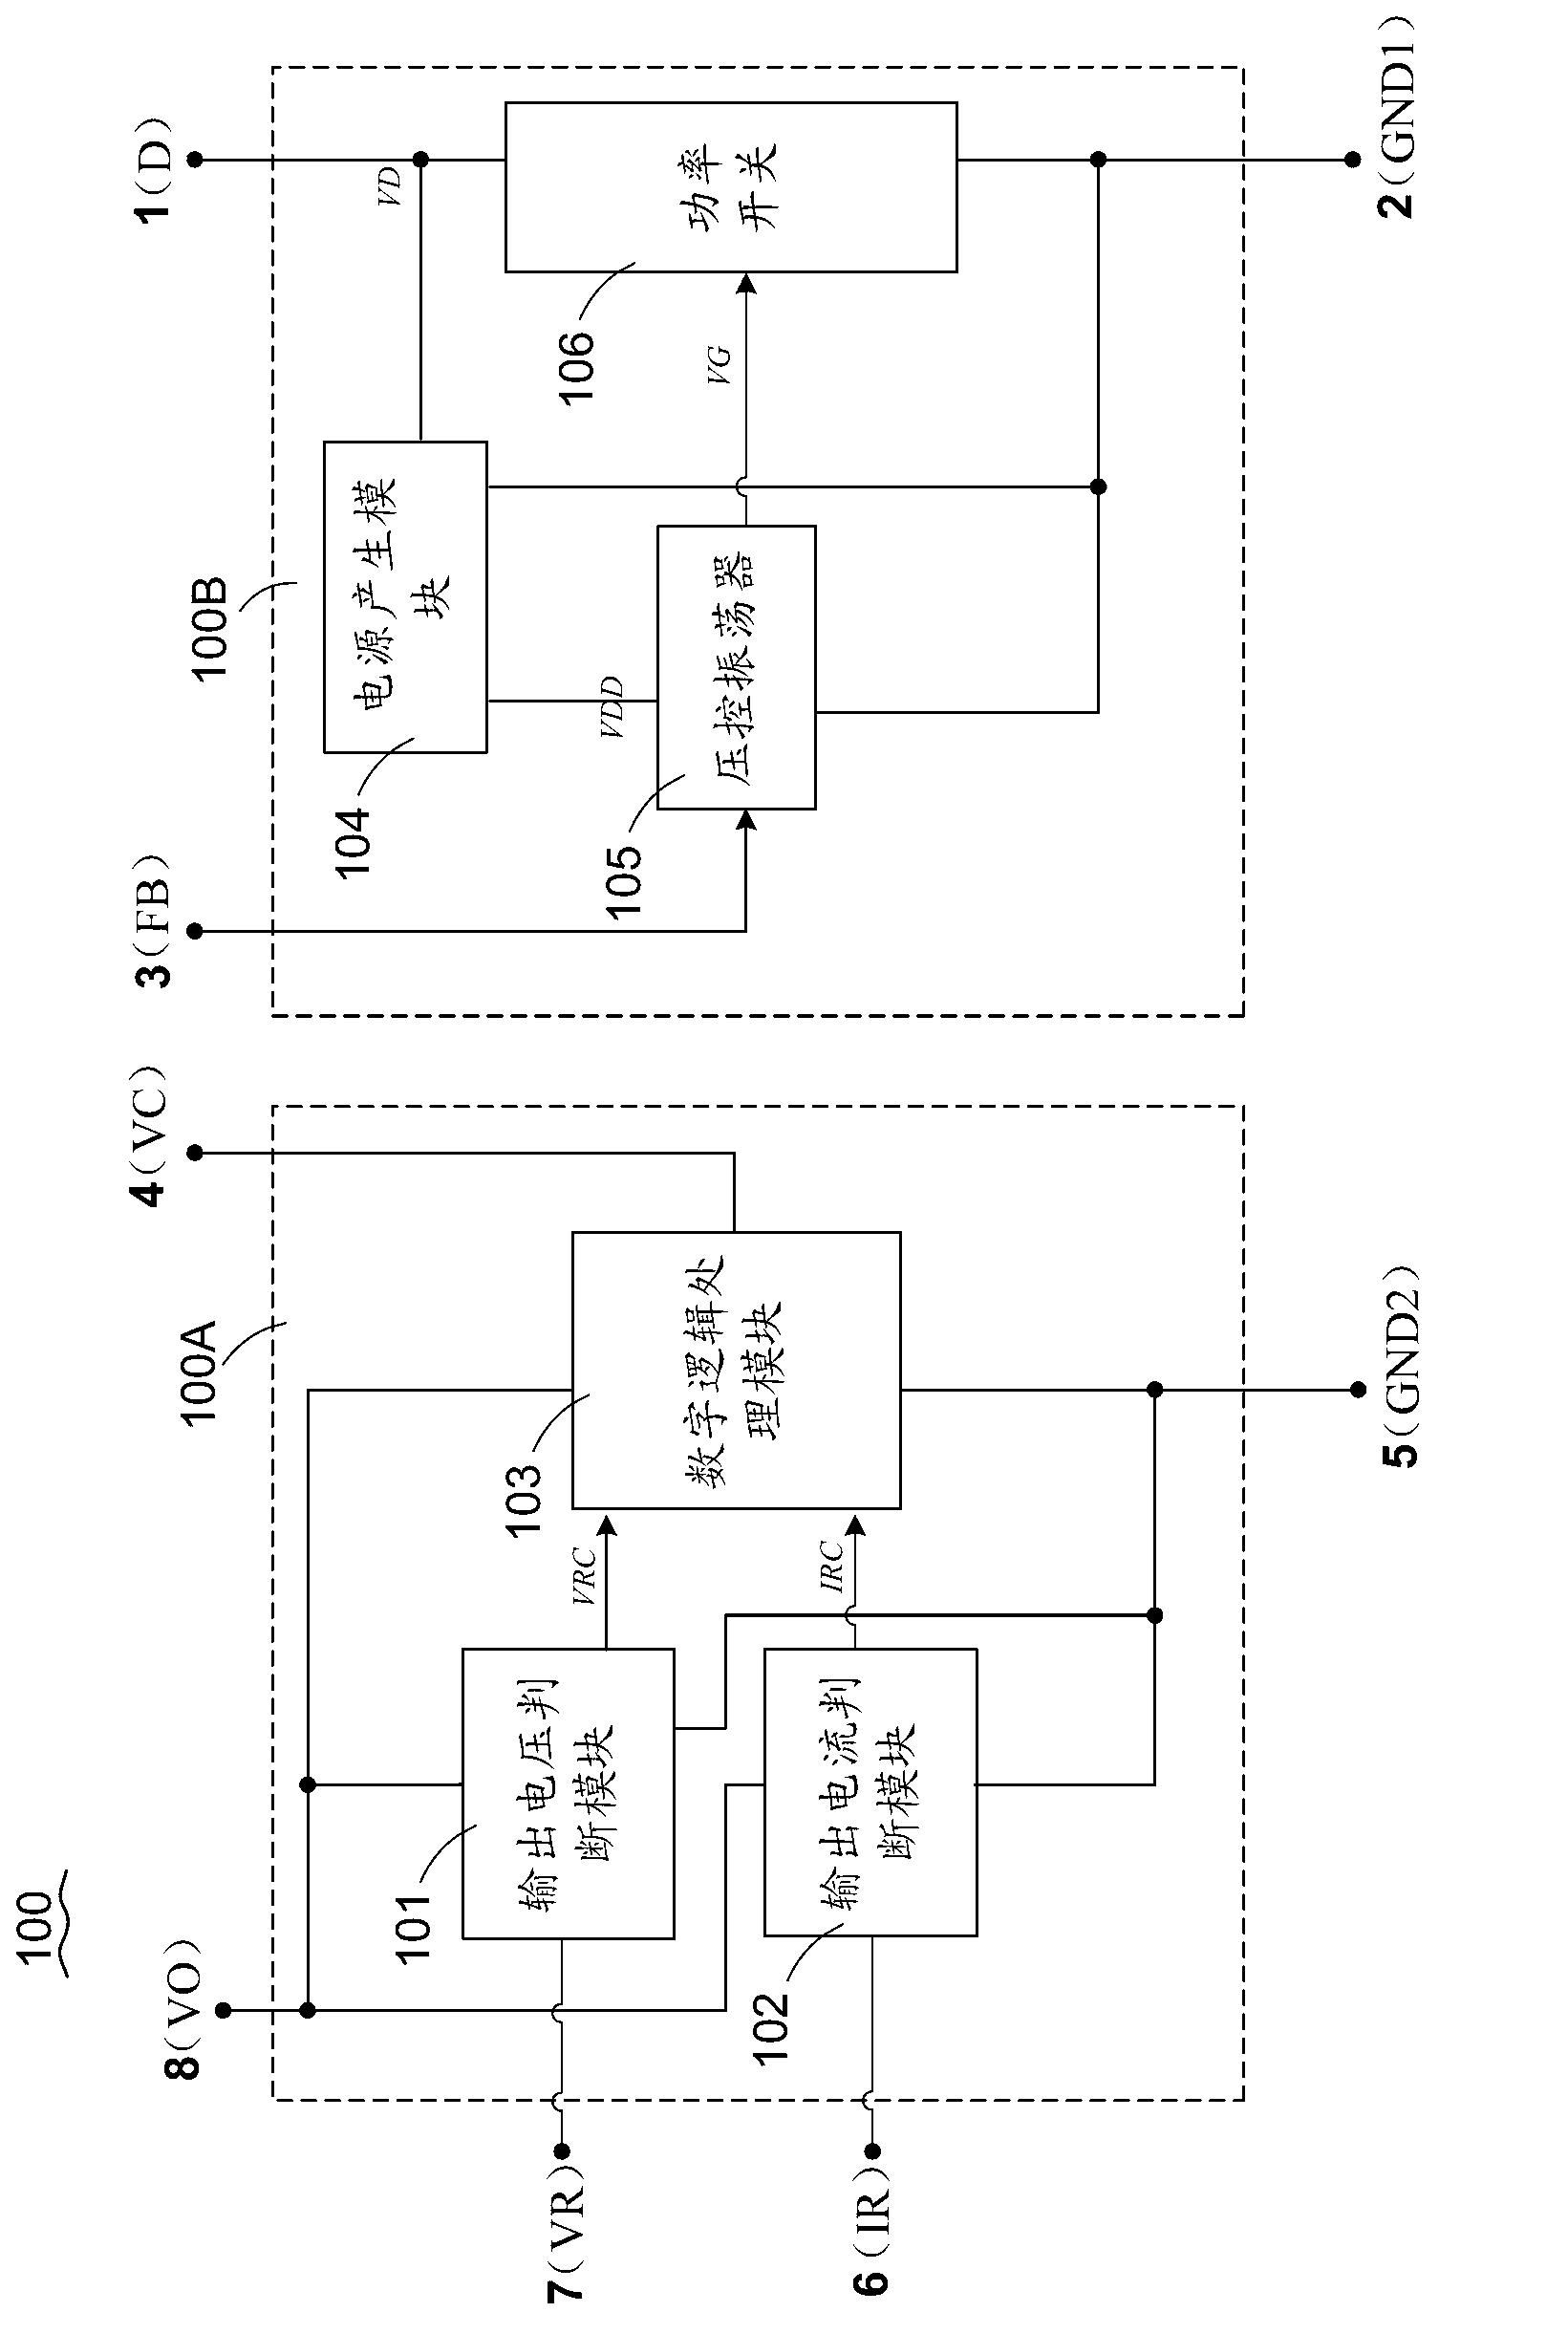 Switch power supply controller and switch power supply circuit